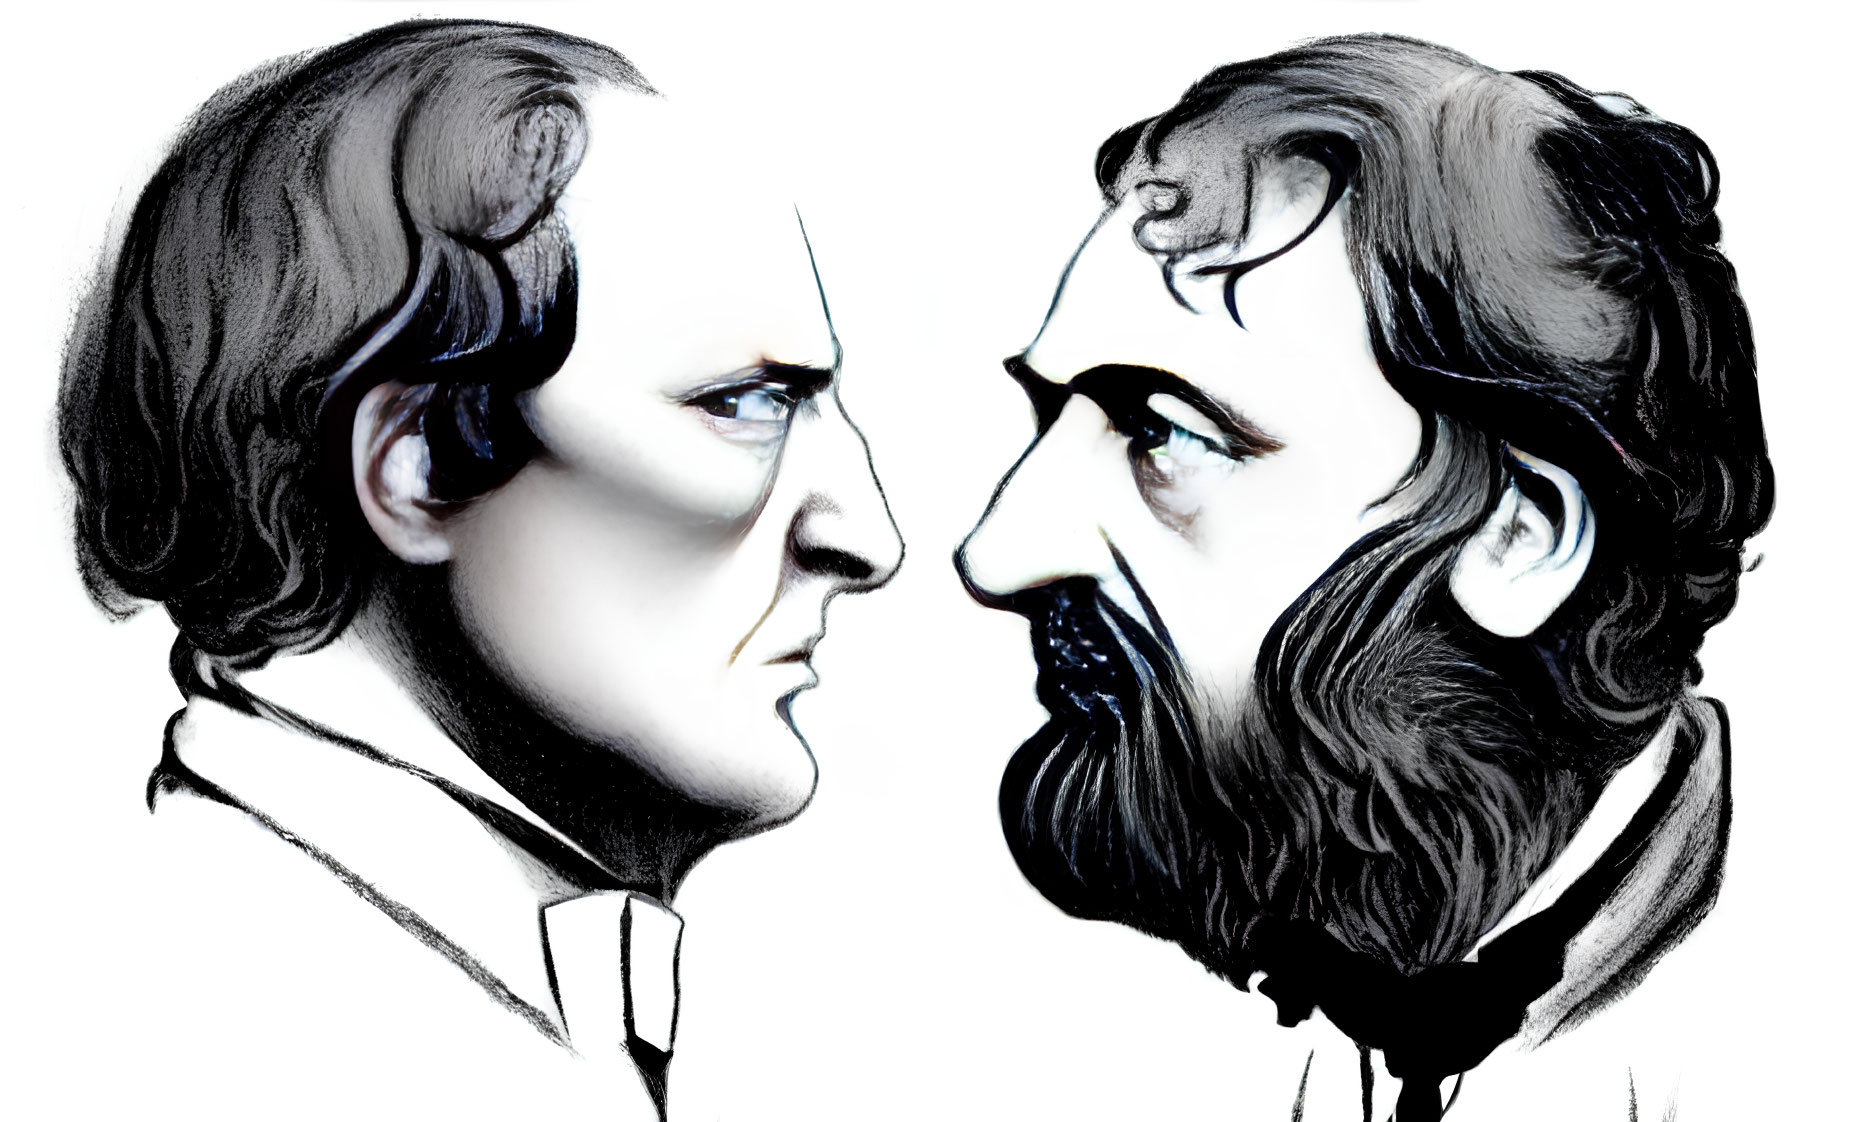 Monochromatic illustrations of men with sideburns and beard, facing each other.